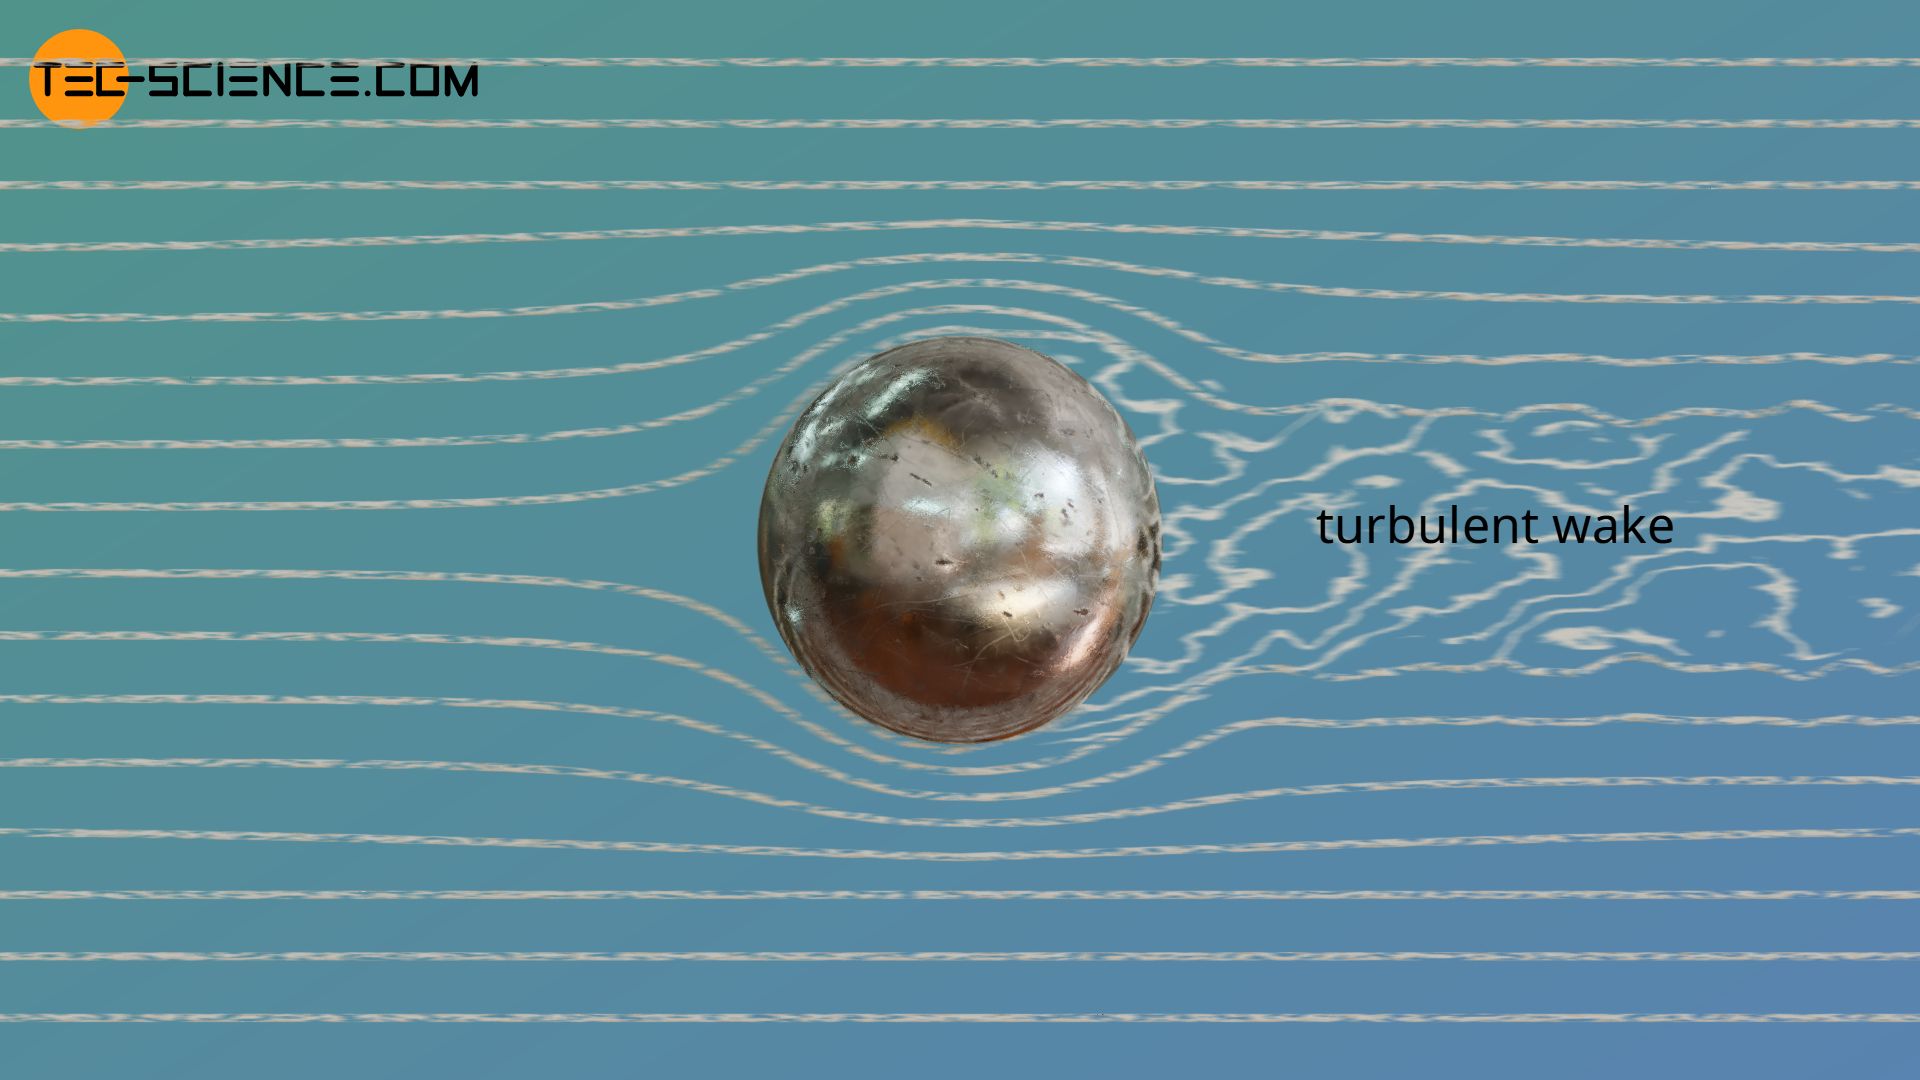 Laminar flow around a sphere with turbulent wake